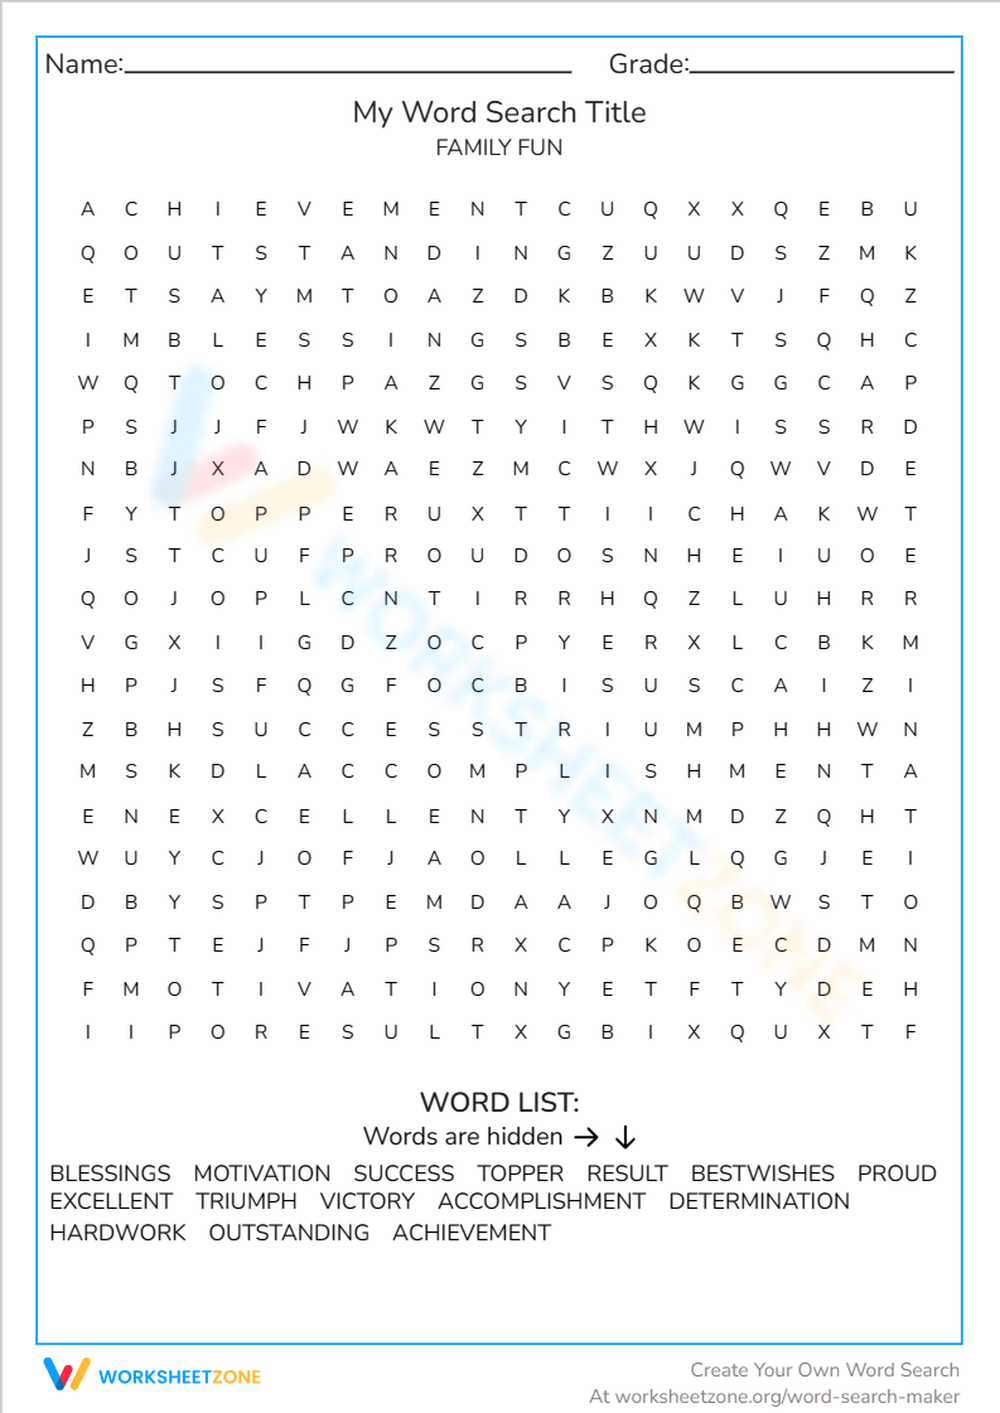 Winter Clothing Word Search